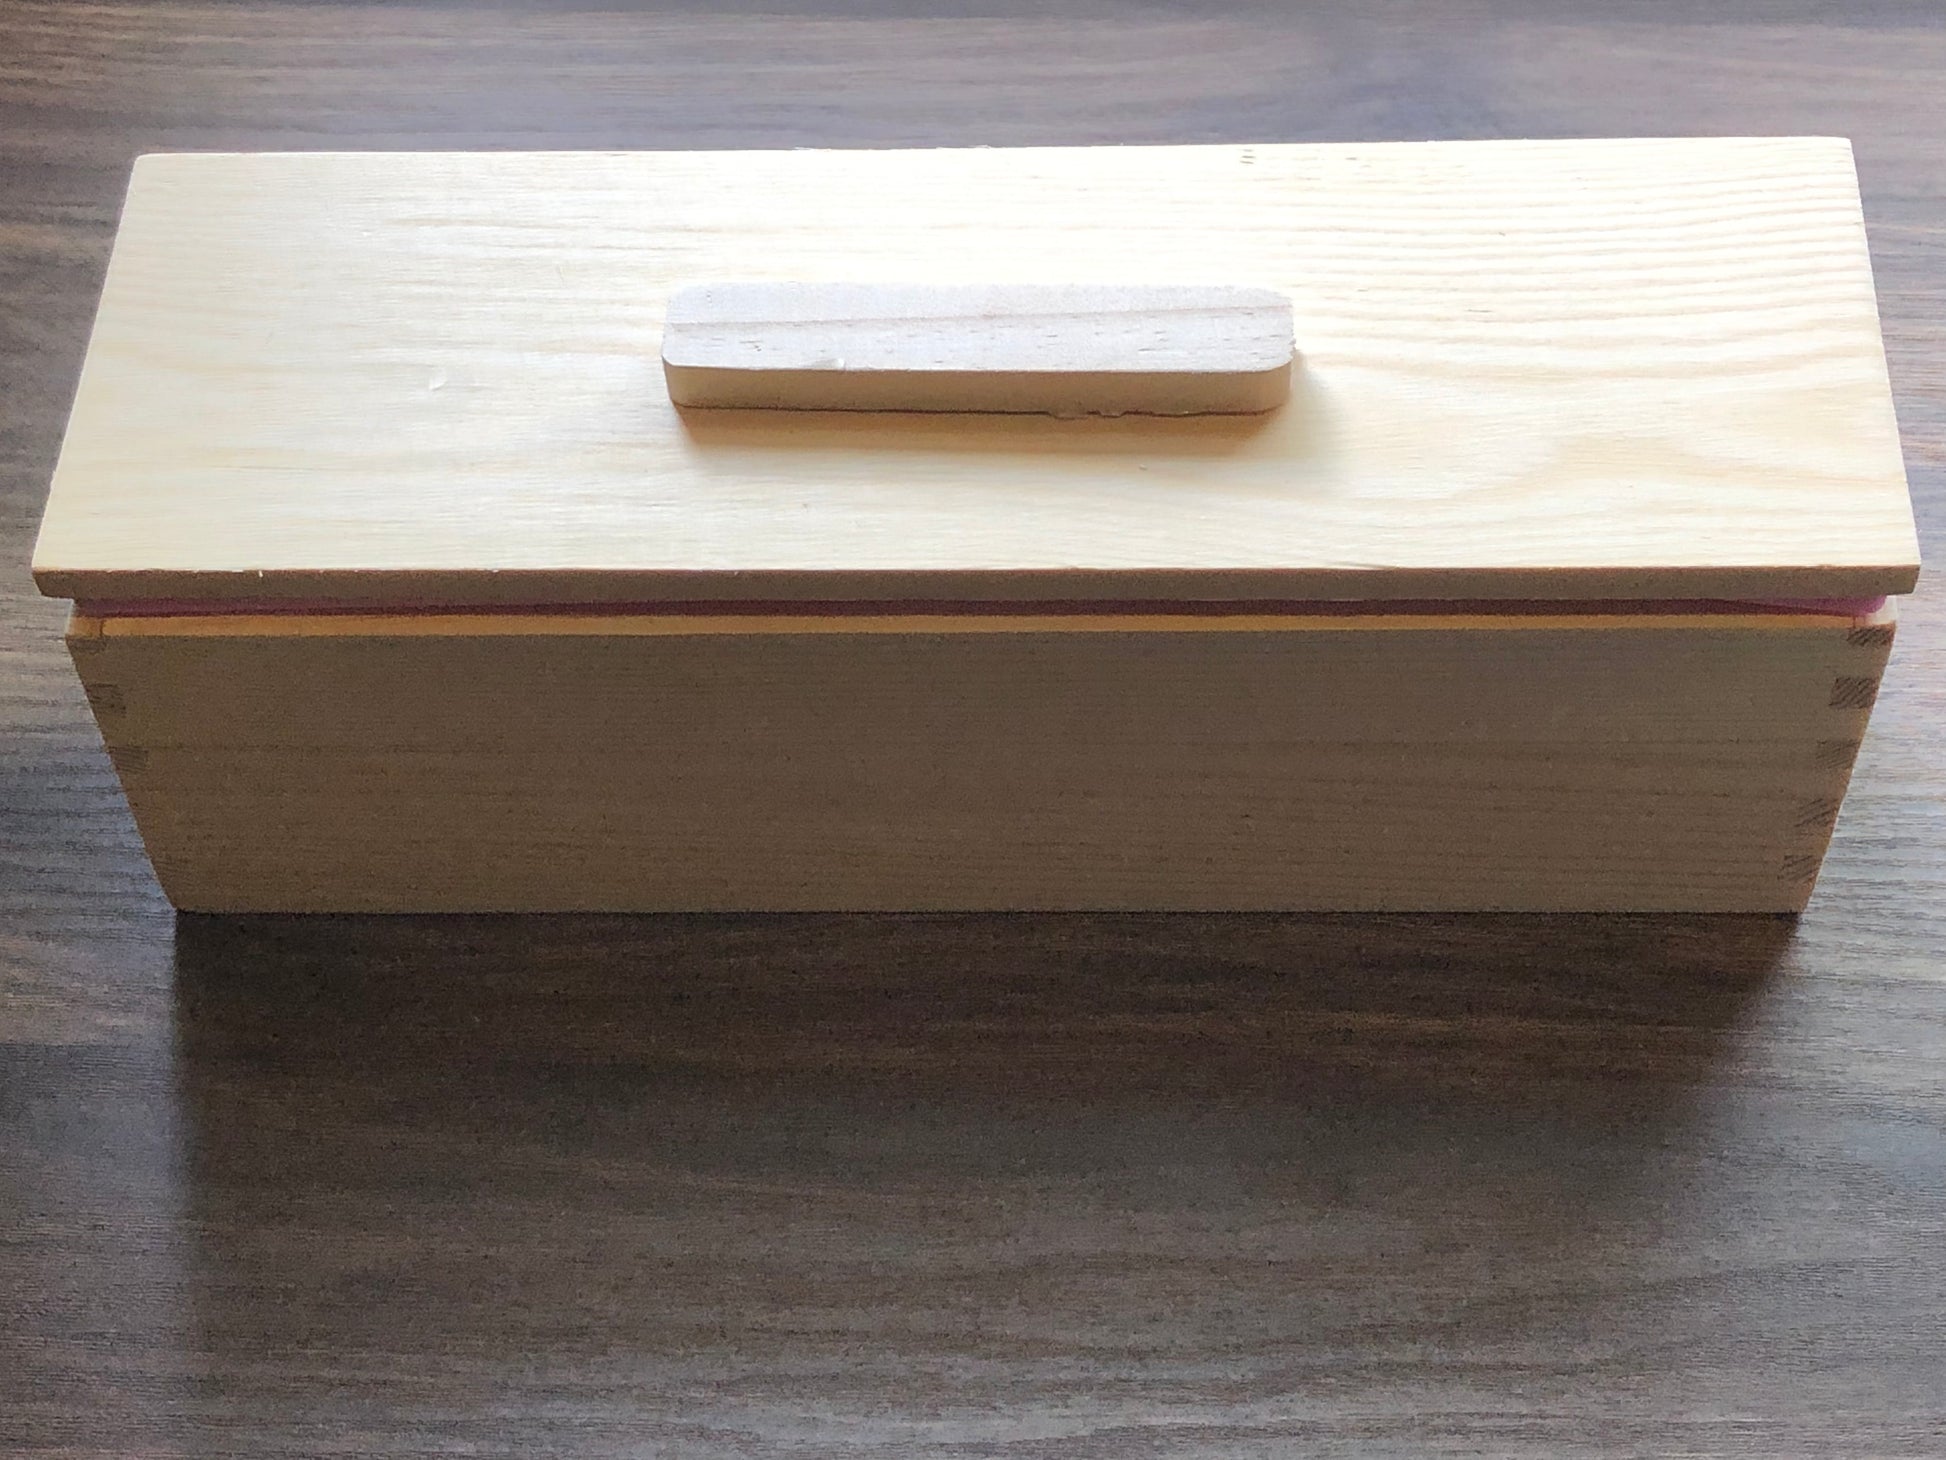 A loaf shaped wood box that has a loose lid with a small handle on the top of the lid rests on a wooden surface.  The wood of the mold is light in color.